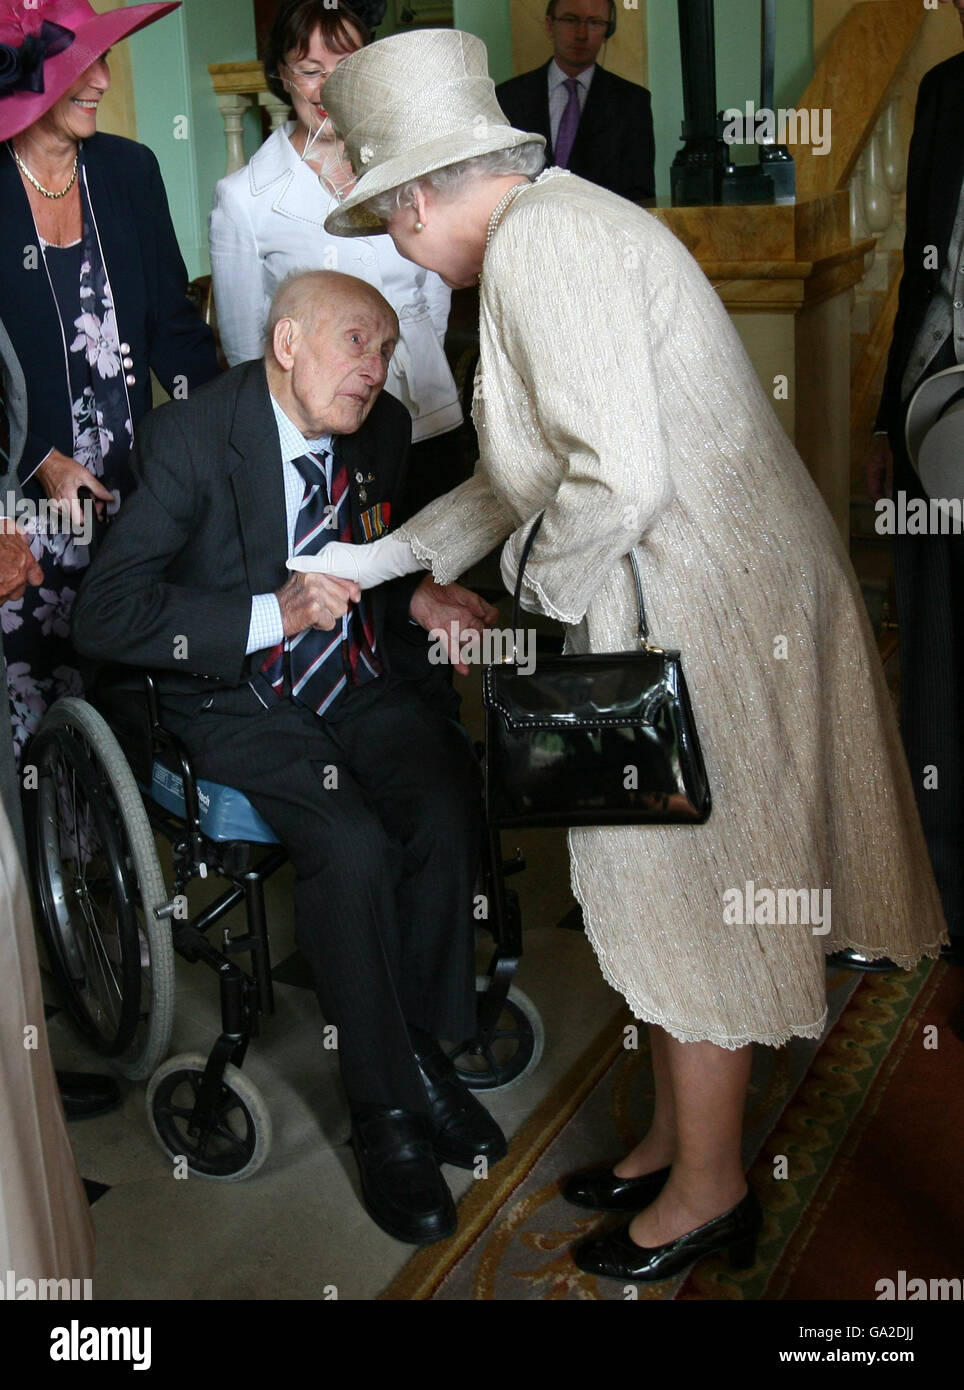 Britain's Queen Elizabeth II (right) meets the oldest surviving soldier from the First World War, 111 year old Henry Allingham (centre), at the Buckingham Palace Garden Party in London. Stock Photo